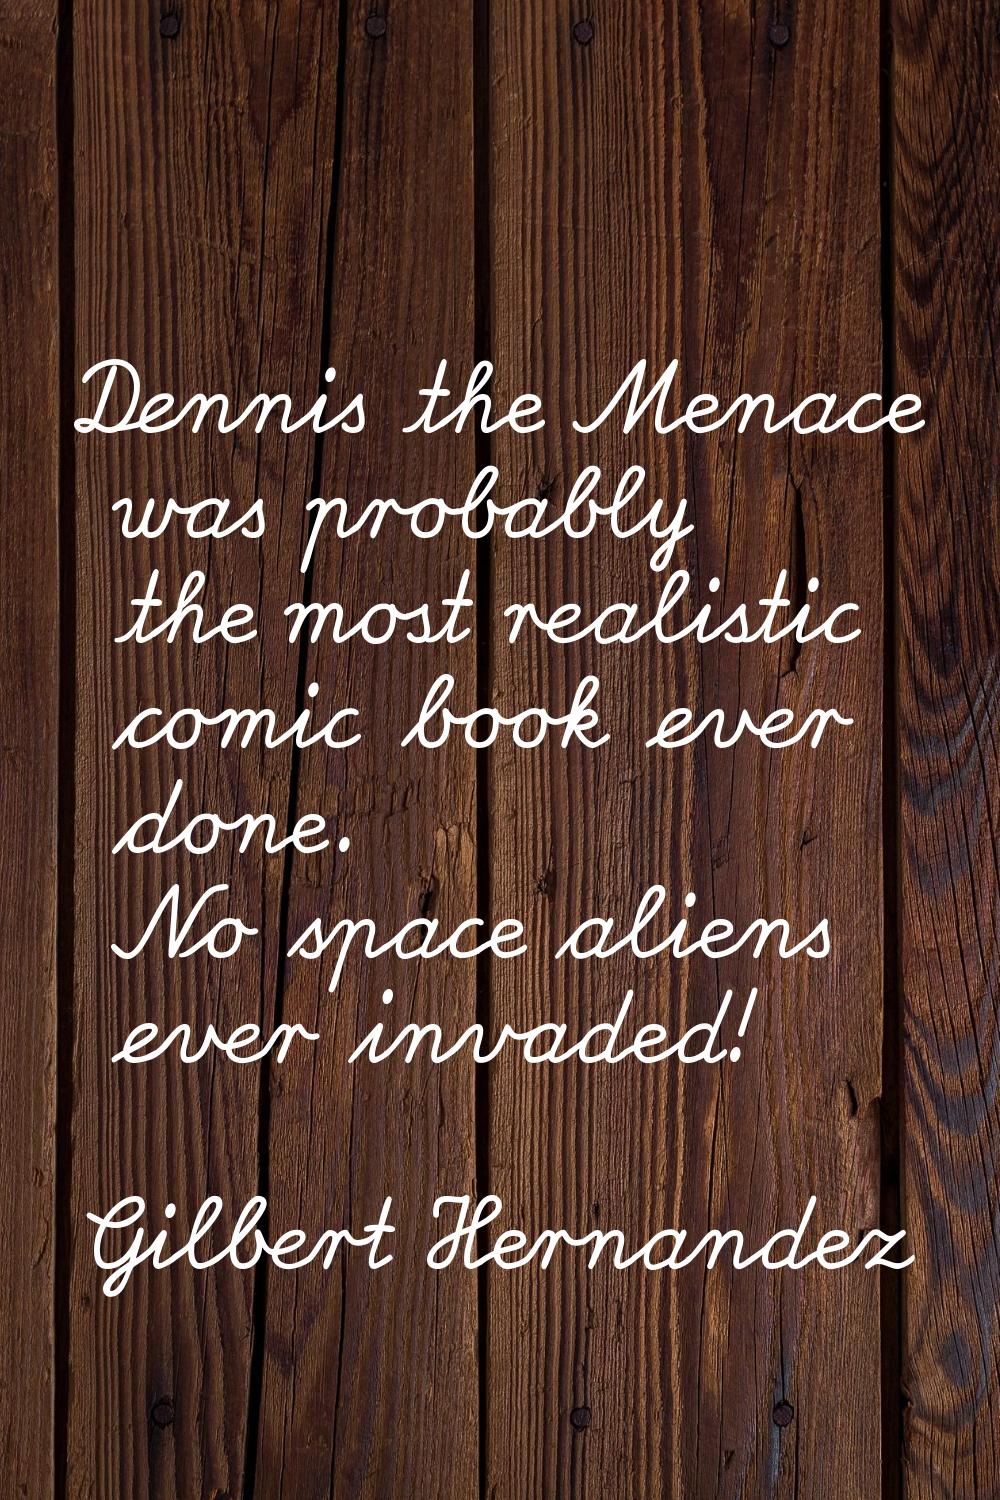 Dennis the Menace was probably the most realistic comic book ever done. No space aliens ever invade